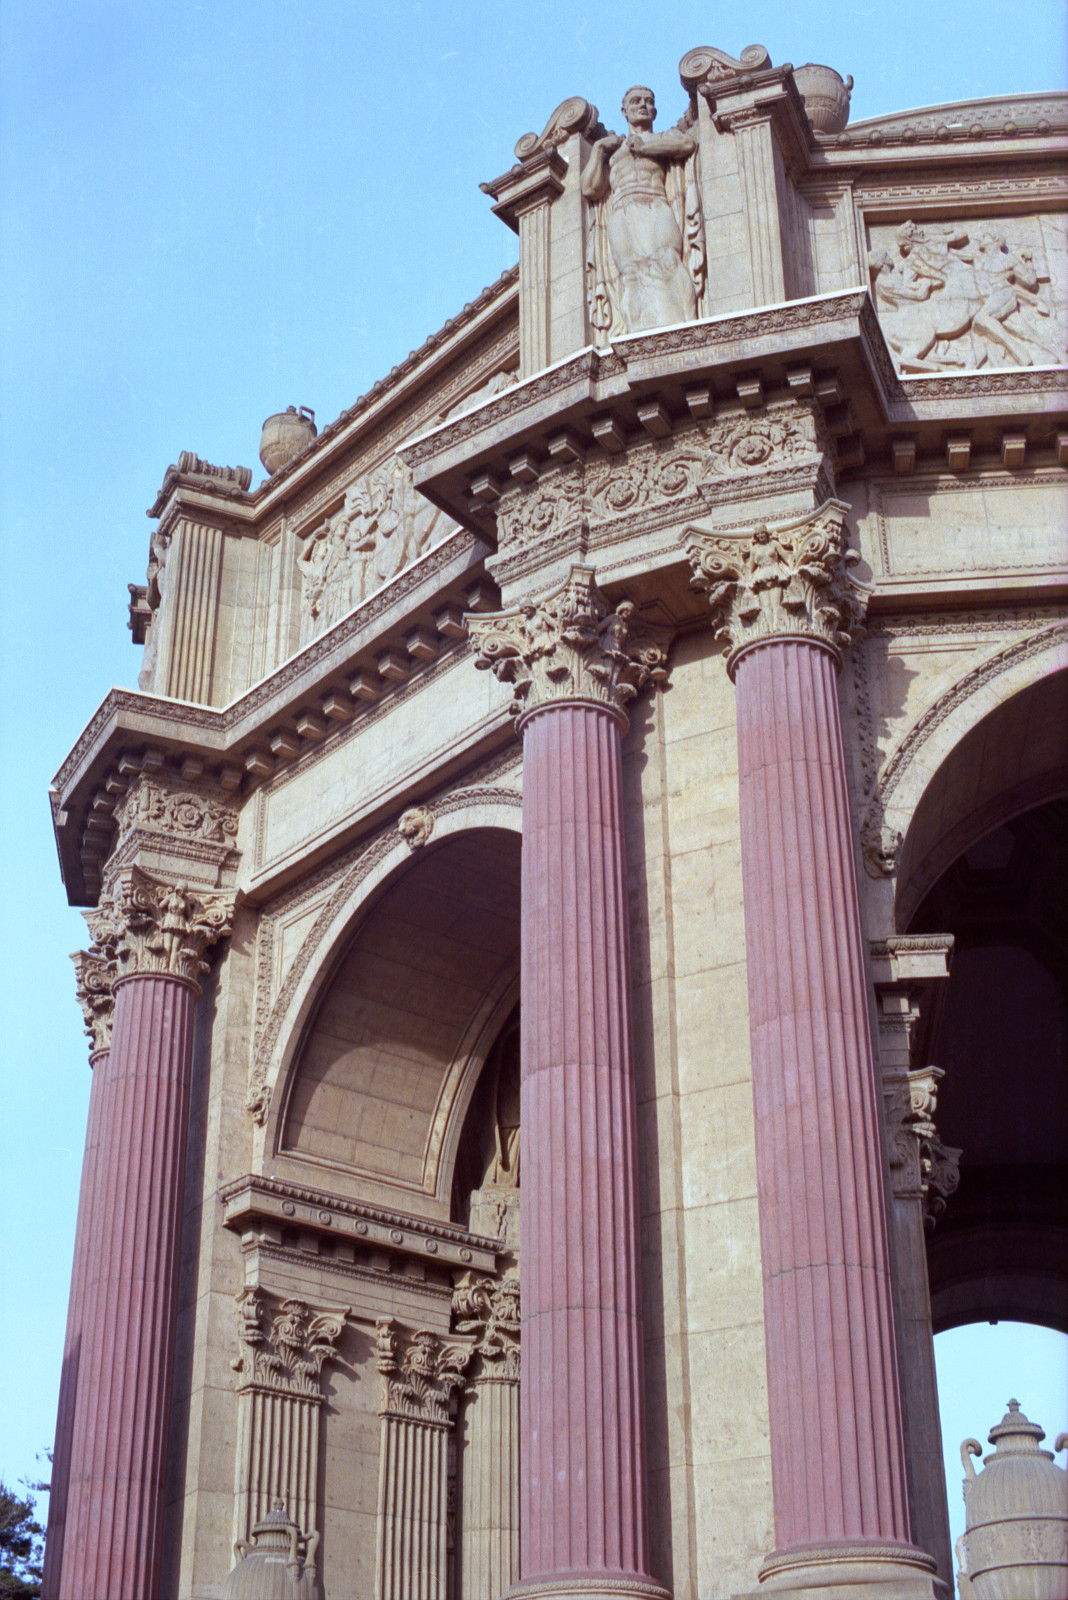 Dome of the Palace of Fine Arts, San Francisco.